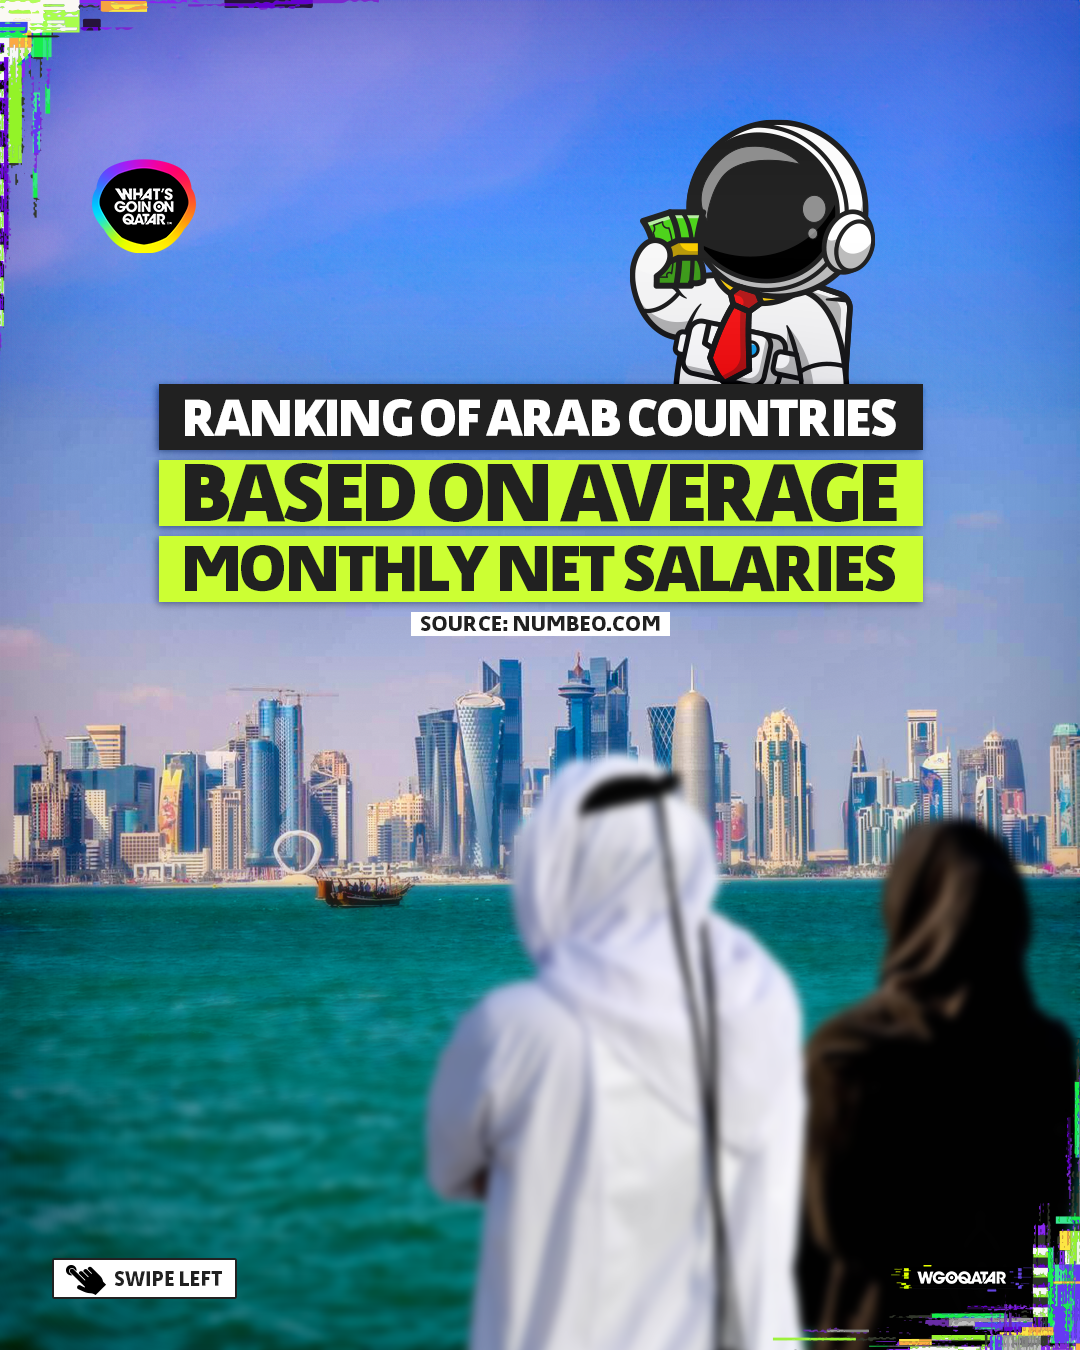 Ranking of Arab countries based on average monthly net salaries